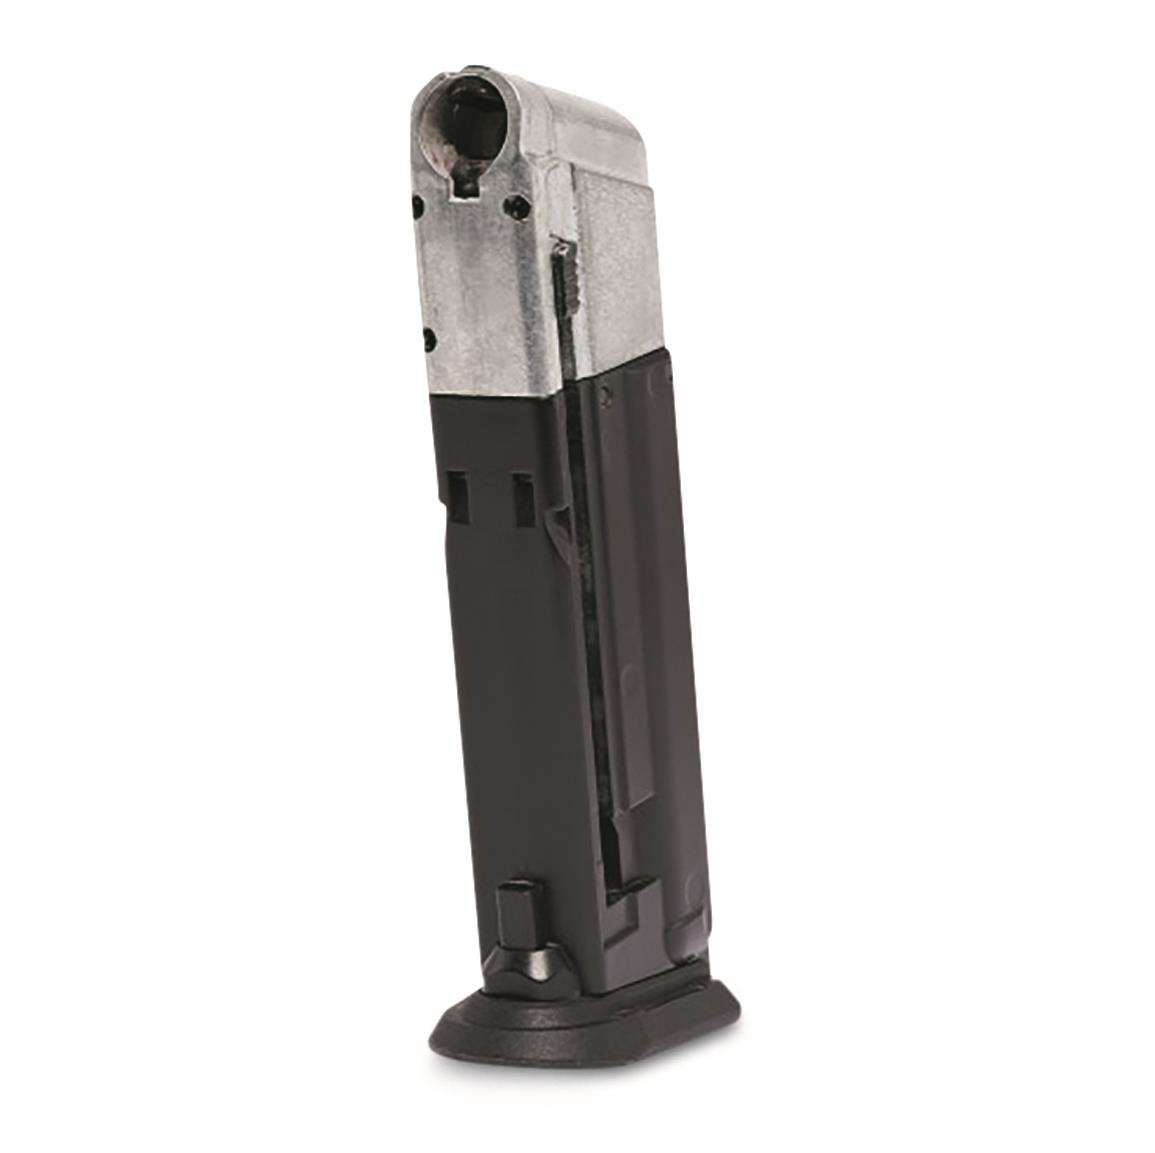 T4E Walther PPQ Paintball Marker Magazine, .43 Caliber, 8 Rounds